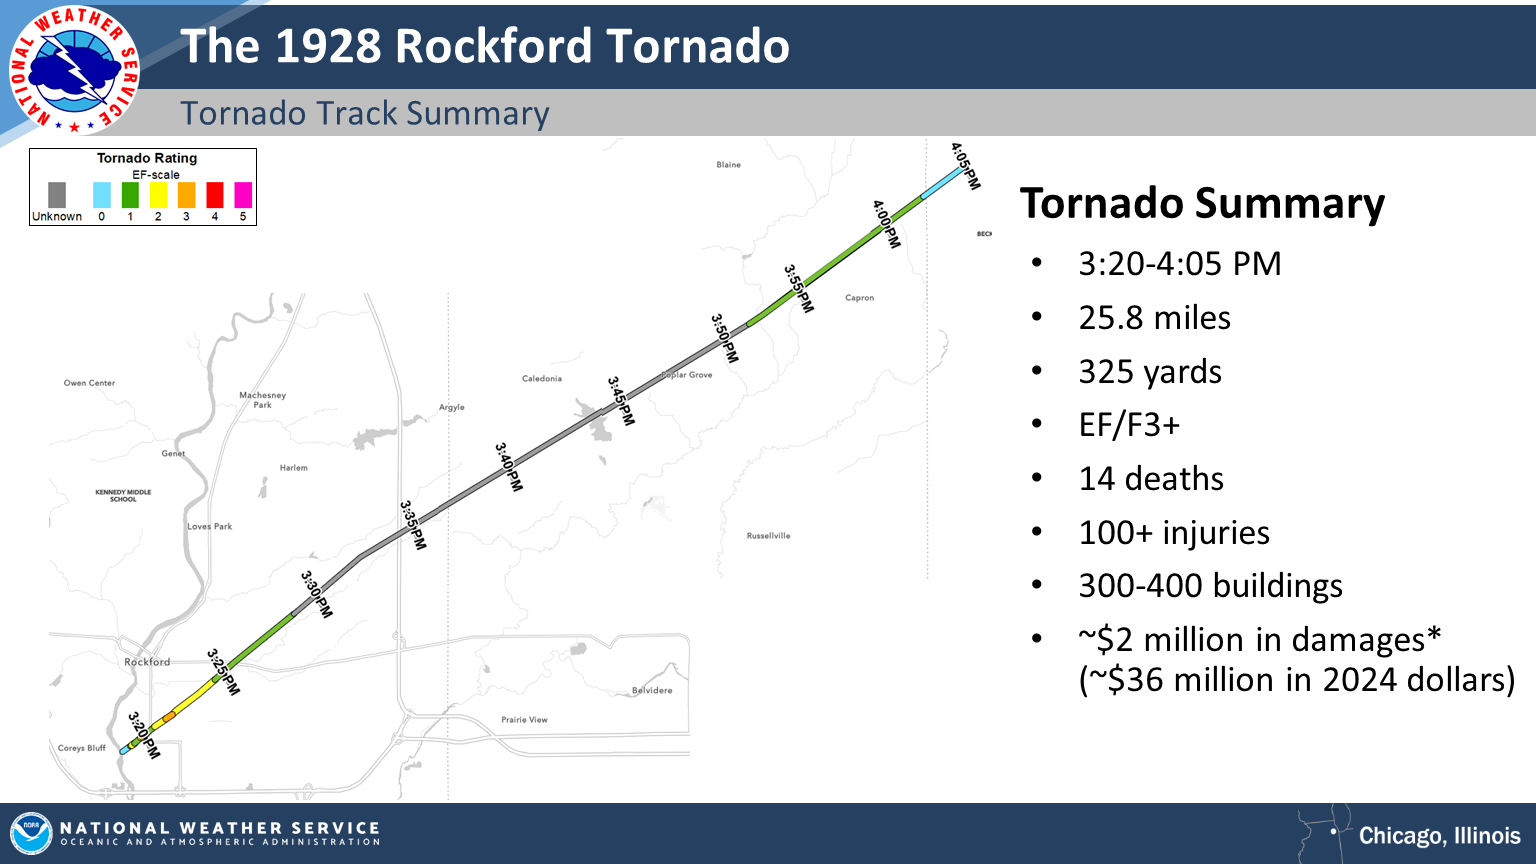 Map showing the track of the 1928 Rockford tornado. Table to the right summarizes some details about the tornado.